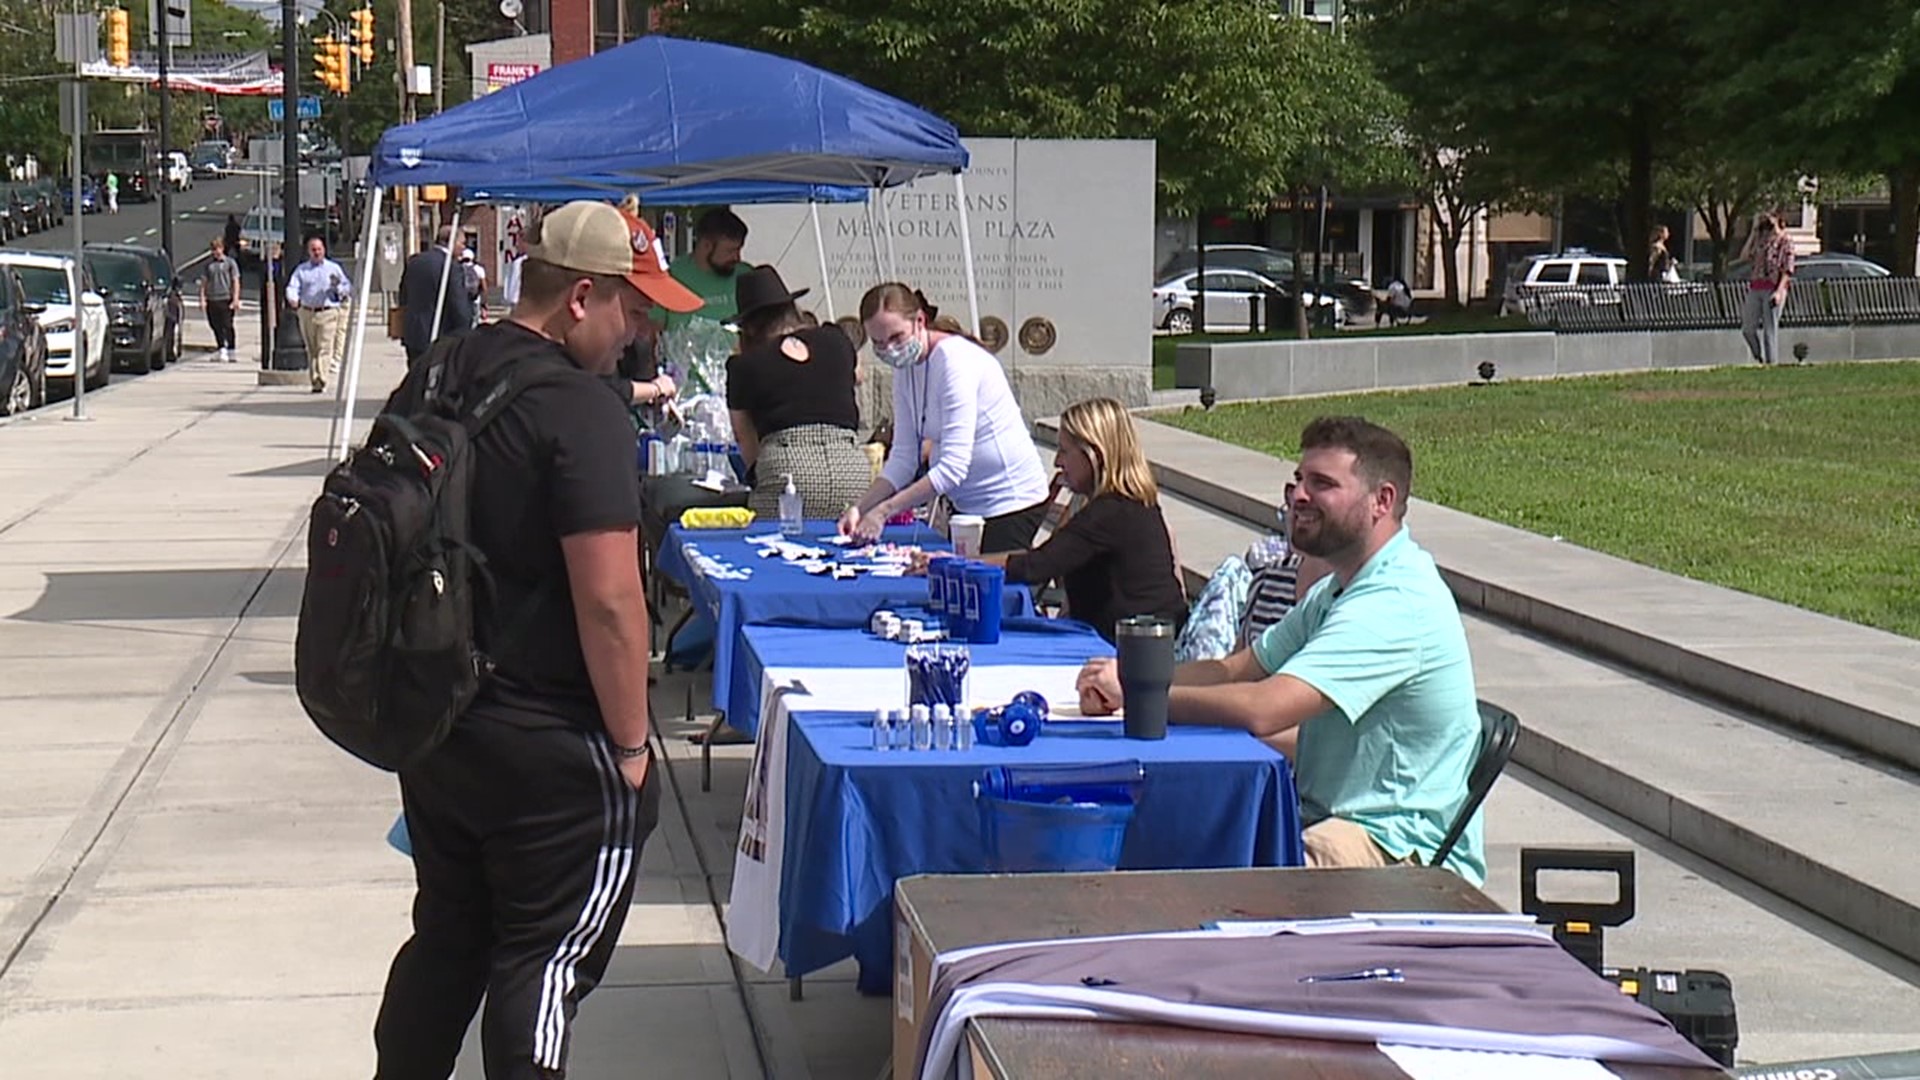 The Lackawanna County Department of Human Services sponsored a job fair in conjunction with CareerLink on Courthouse Square.